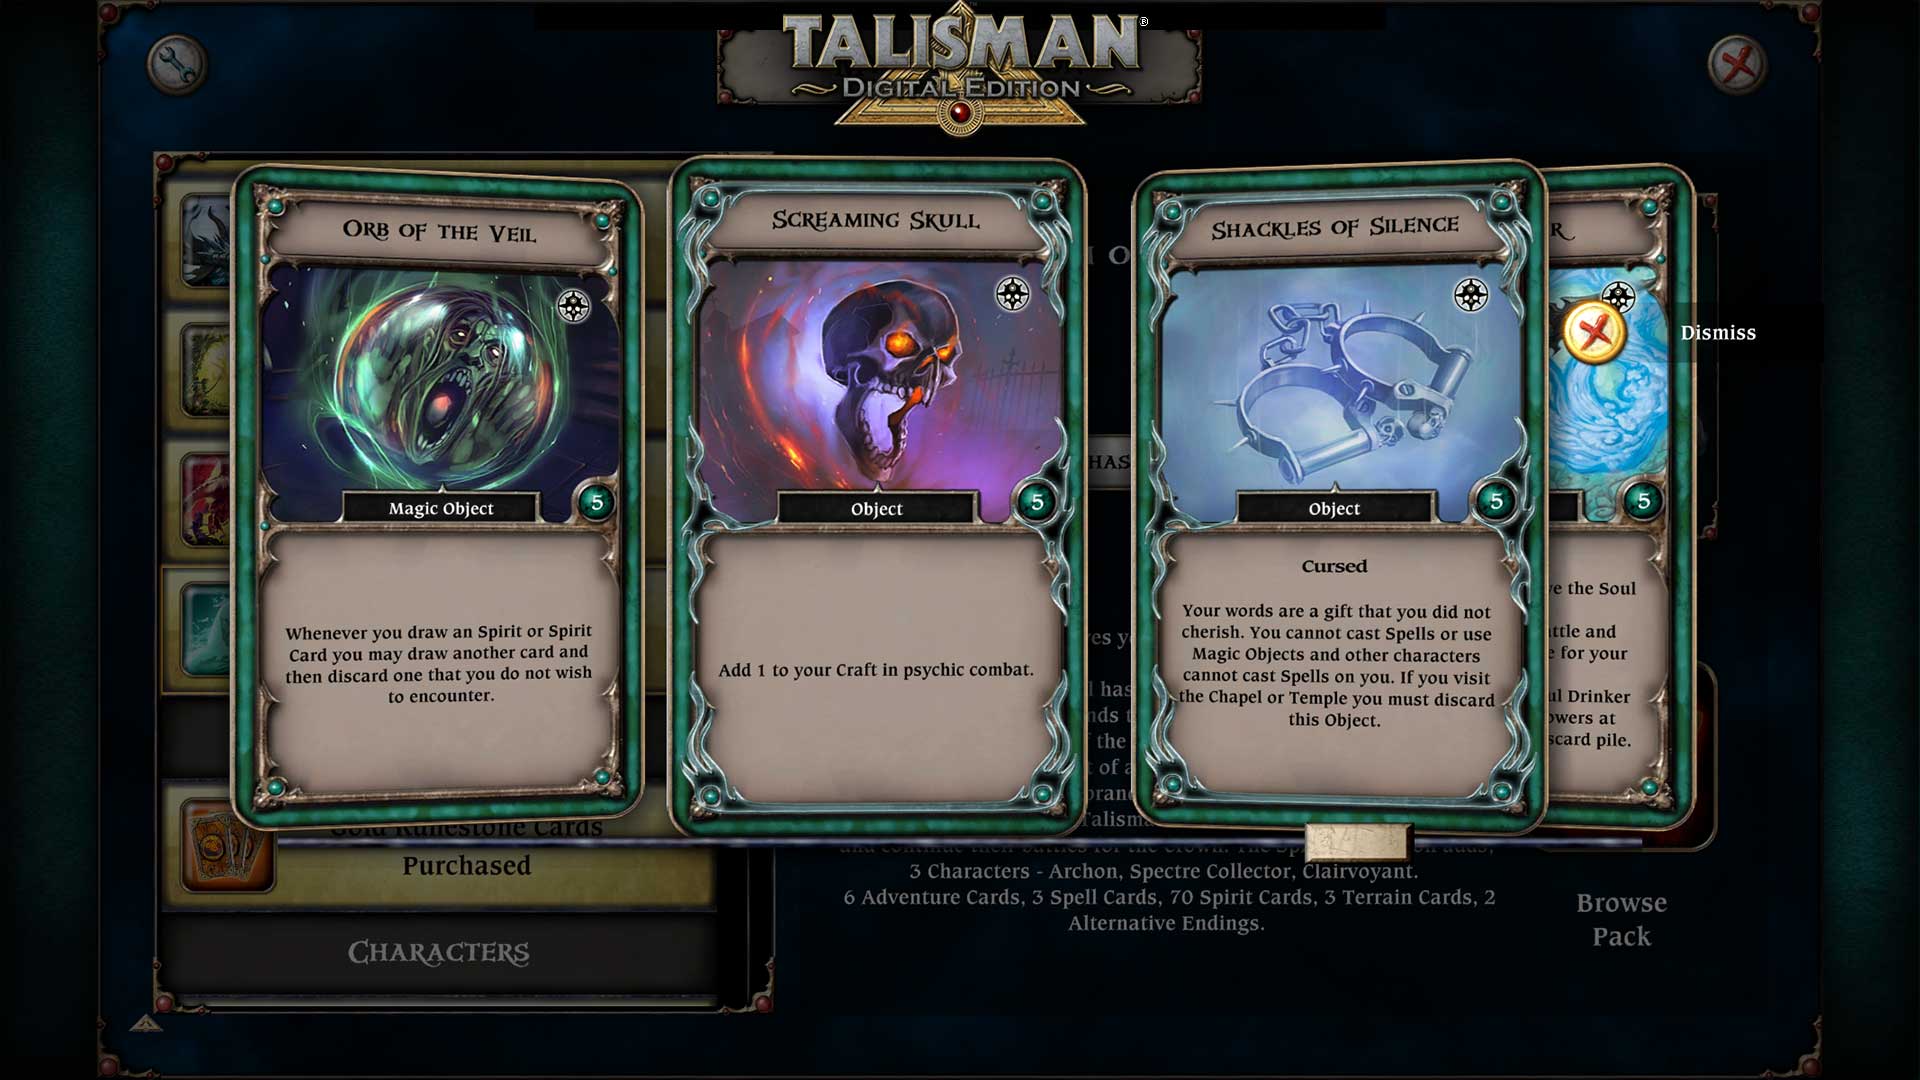 Talisman - The Realm of Souls Expansion DLC Steam CD Key [USD 2.16]